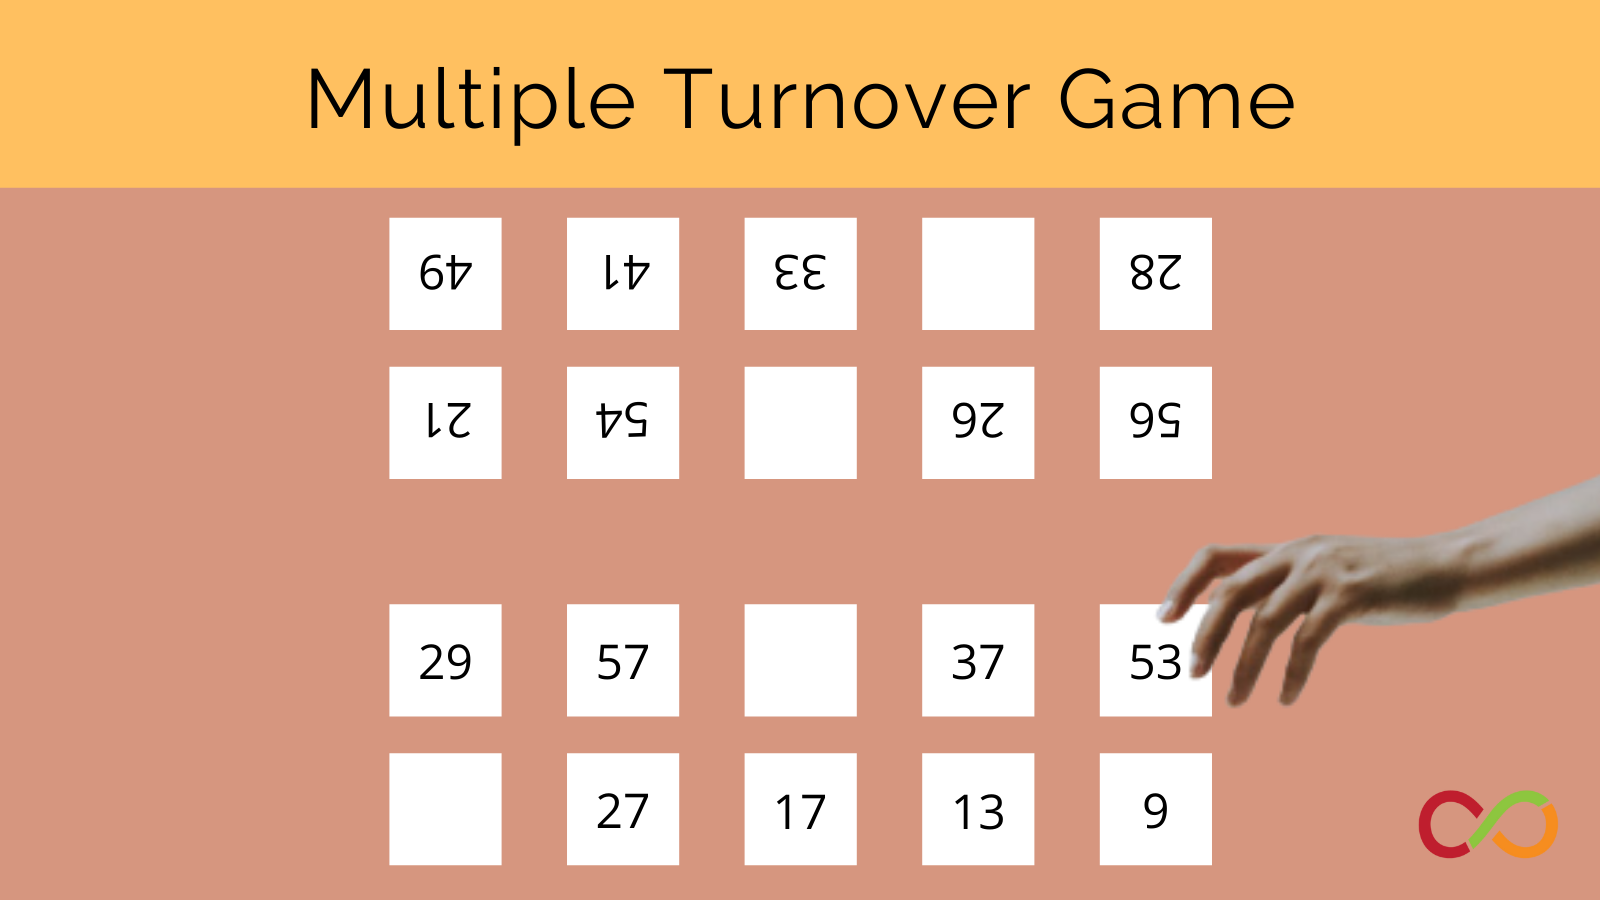 An image linking to the multiple turnover game